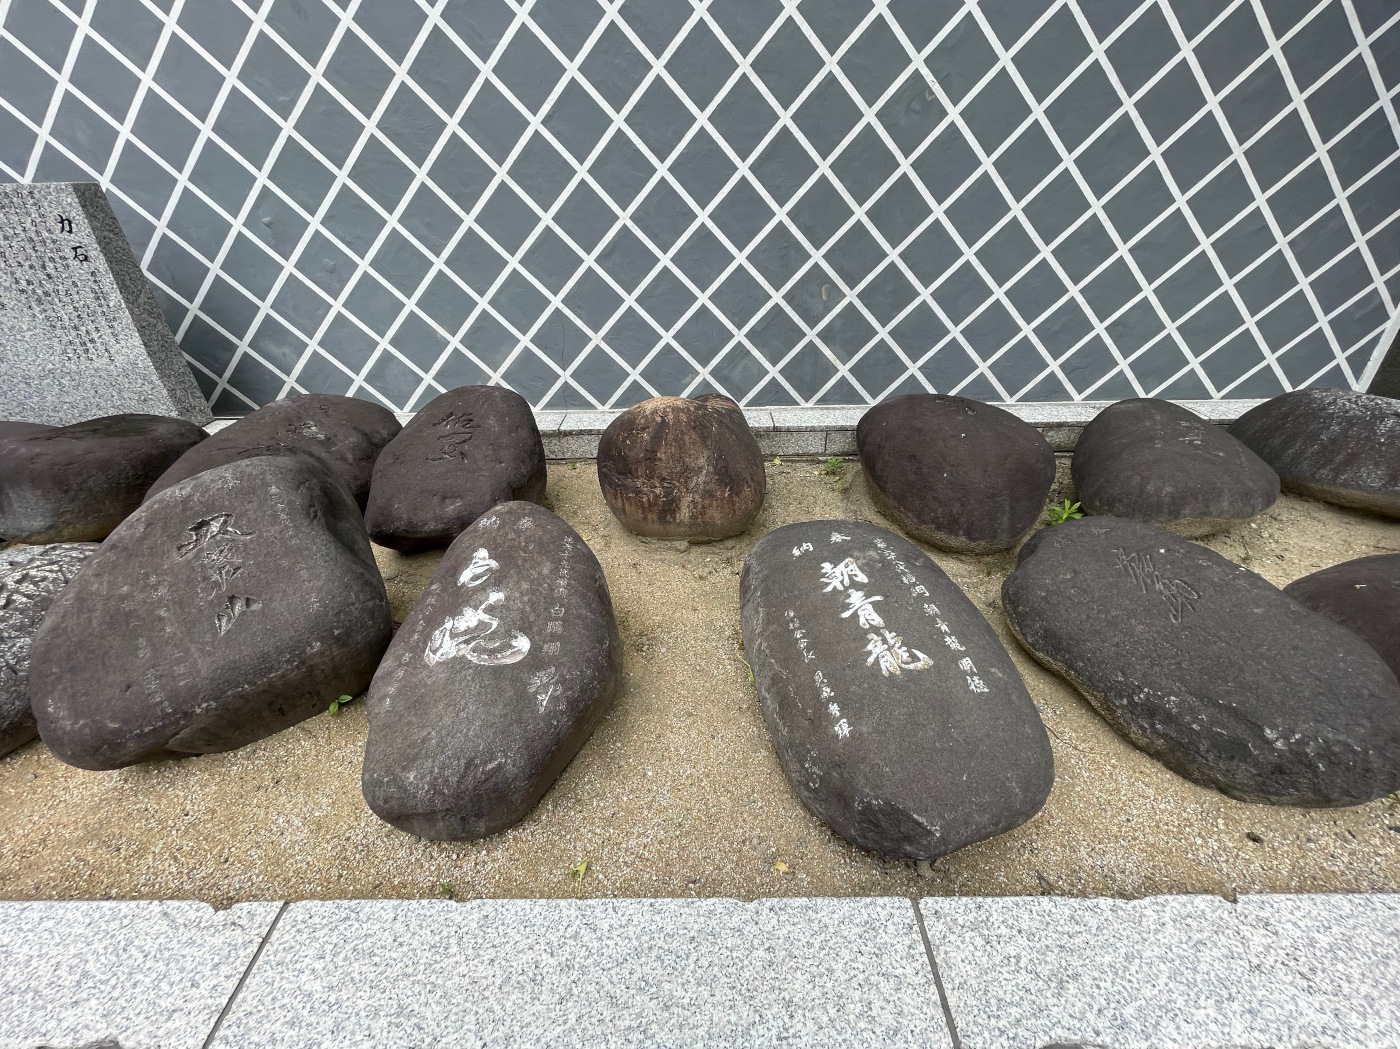 A group of power stones are on display